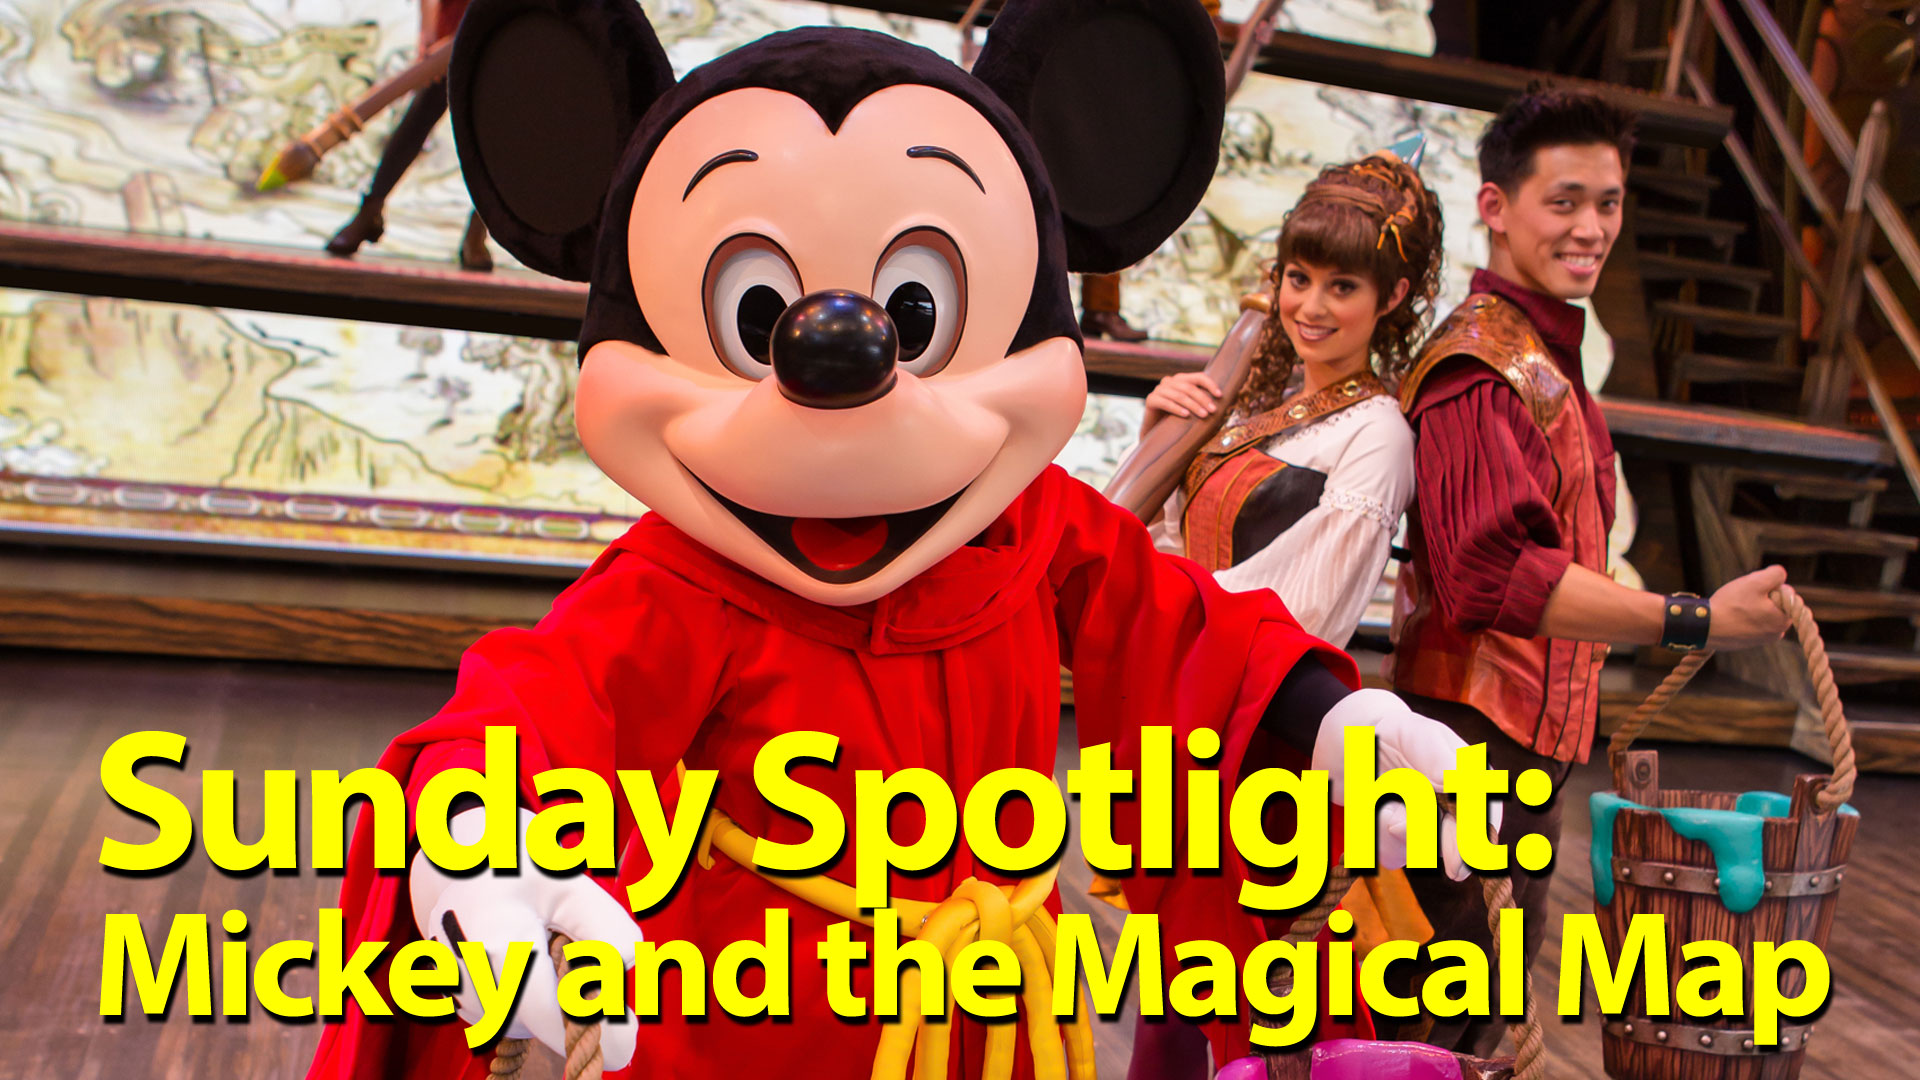 Sunday Spotlight: Mickey and the Magical Map